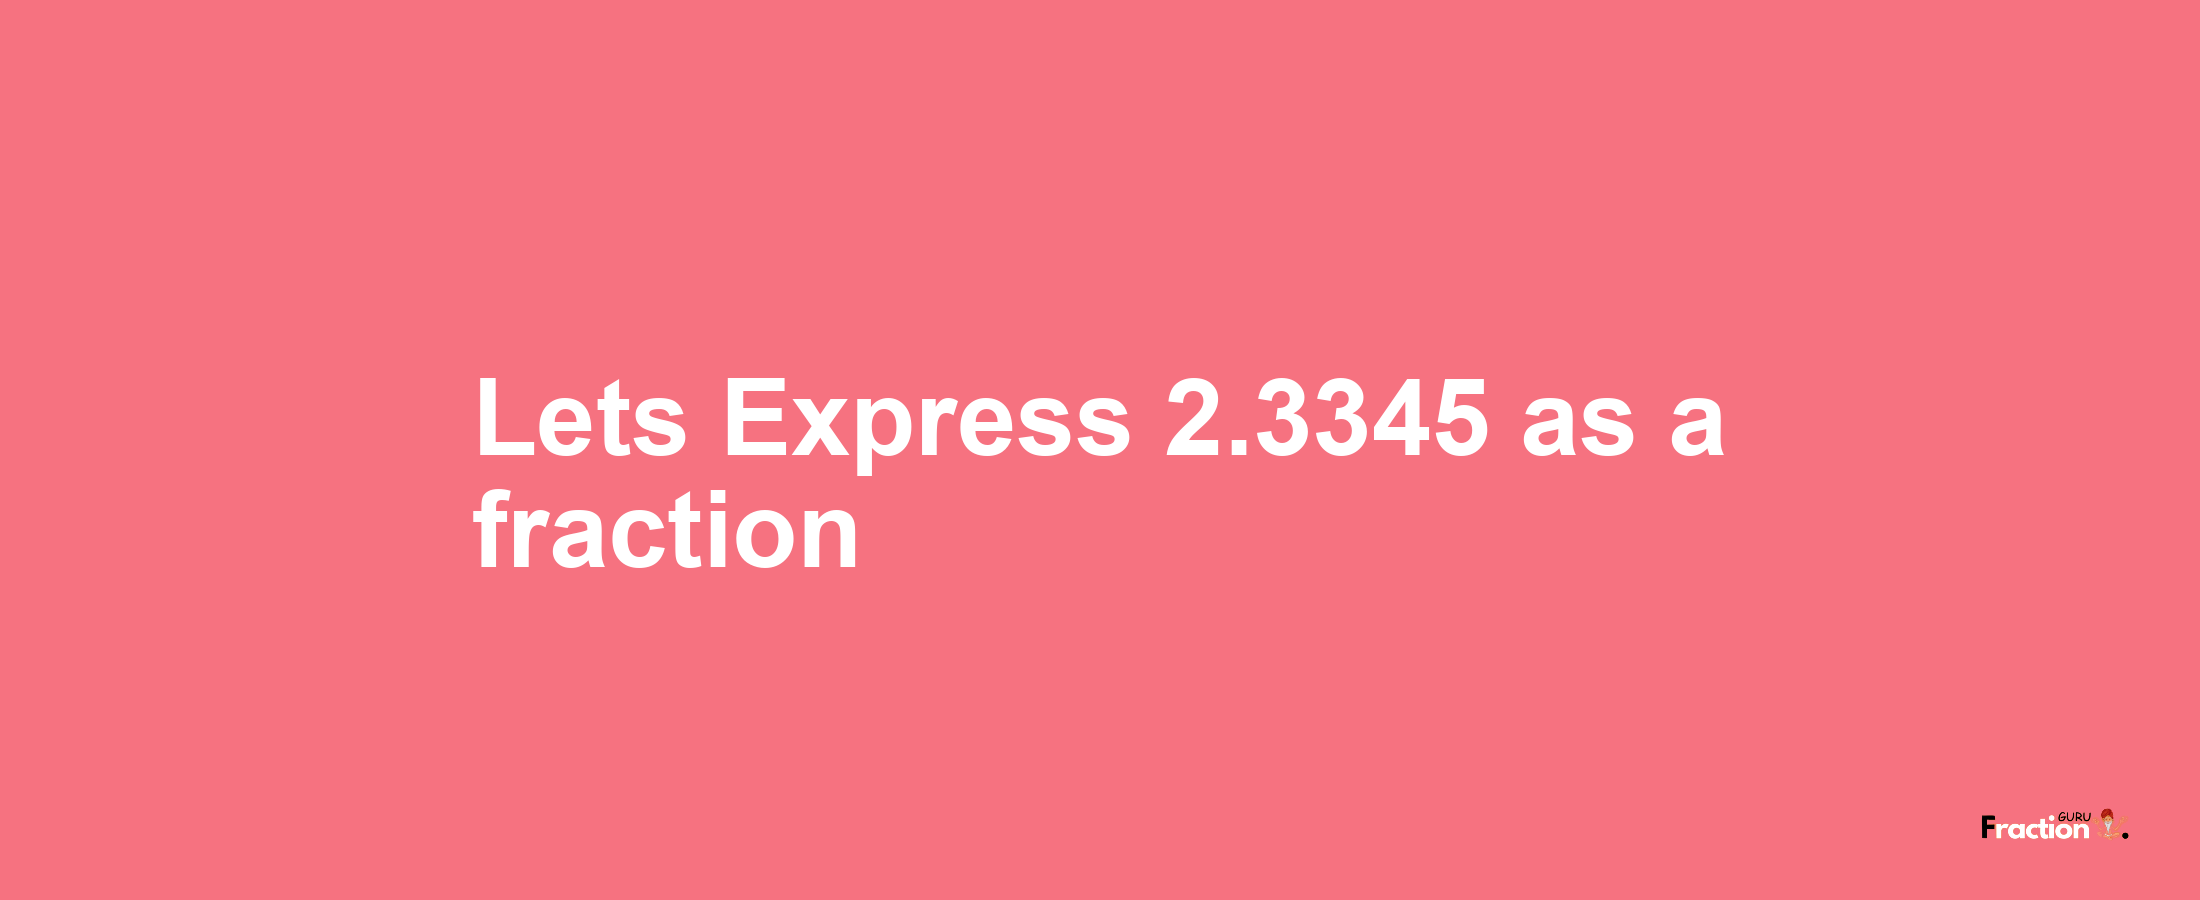 Lets Express 2.3345 as afraction